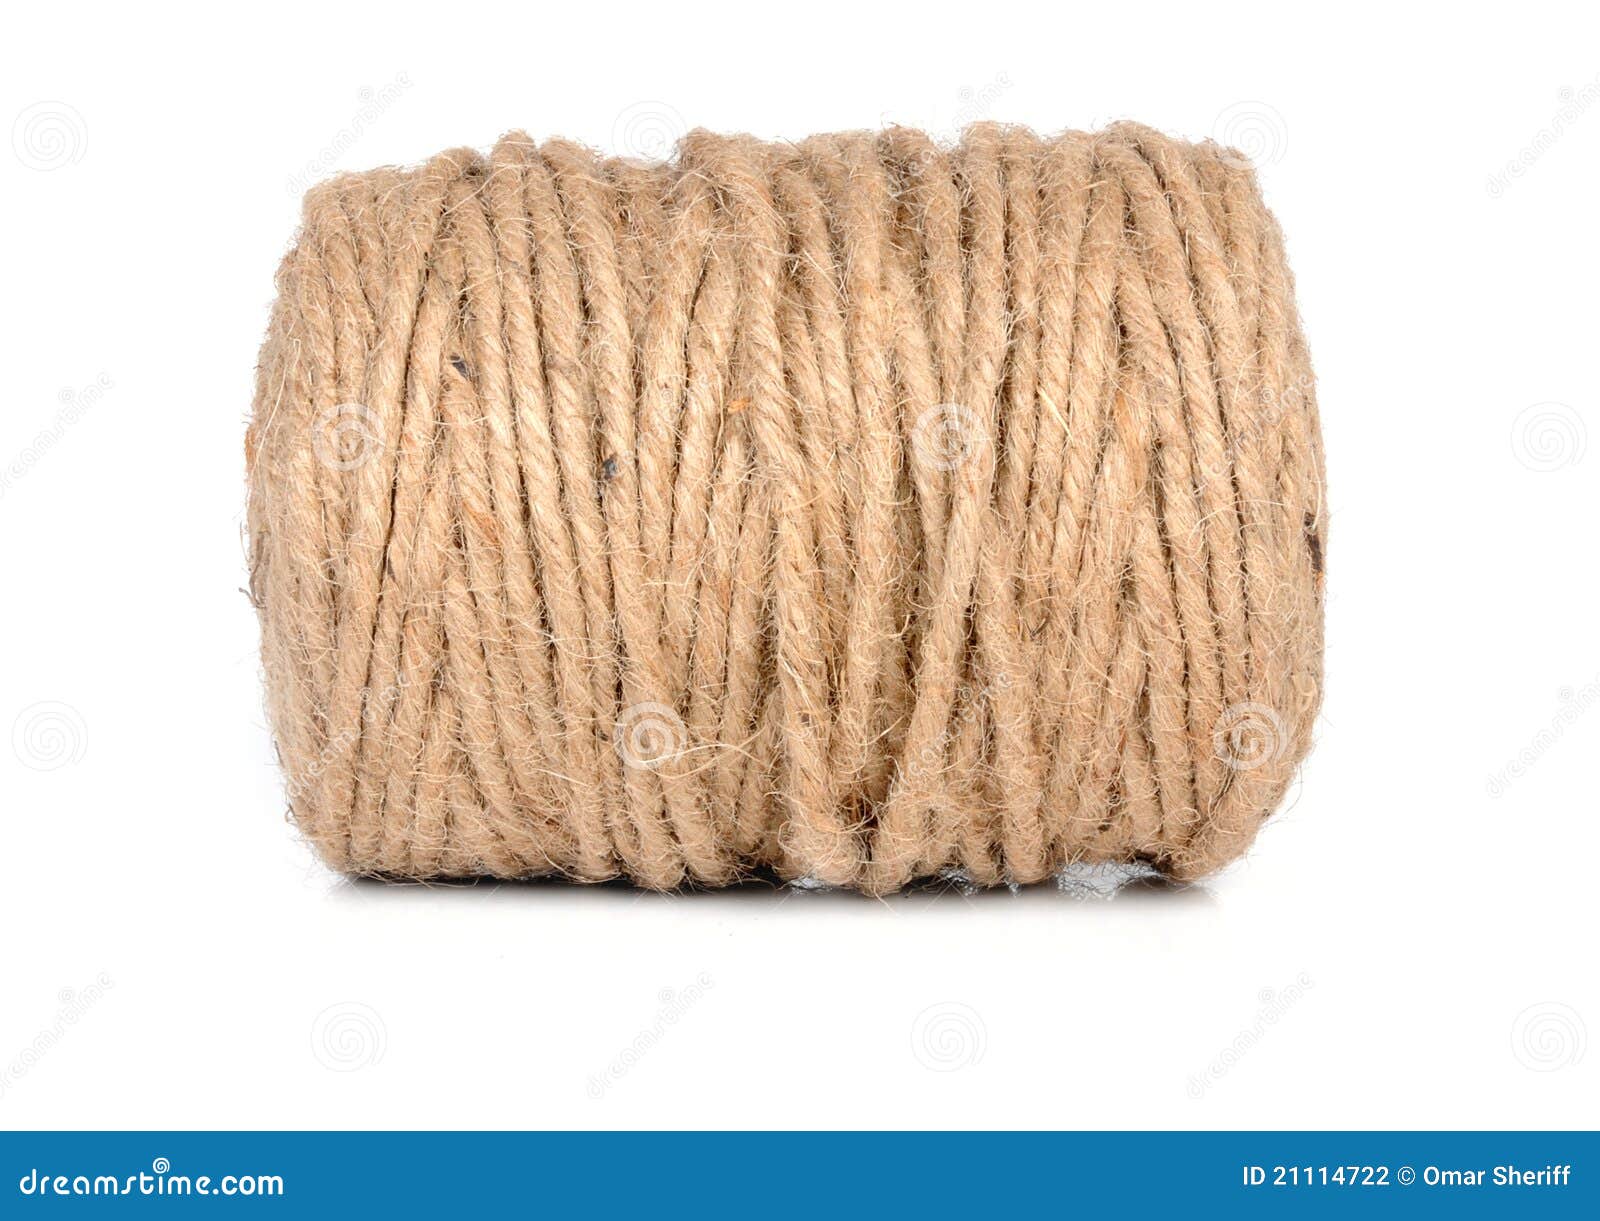 https://thumbs.dreamstime.com/z/thick-string-roll-21114722.jpg